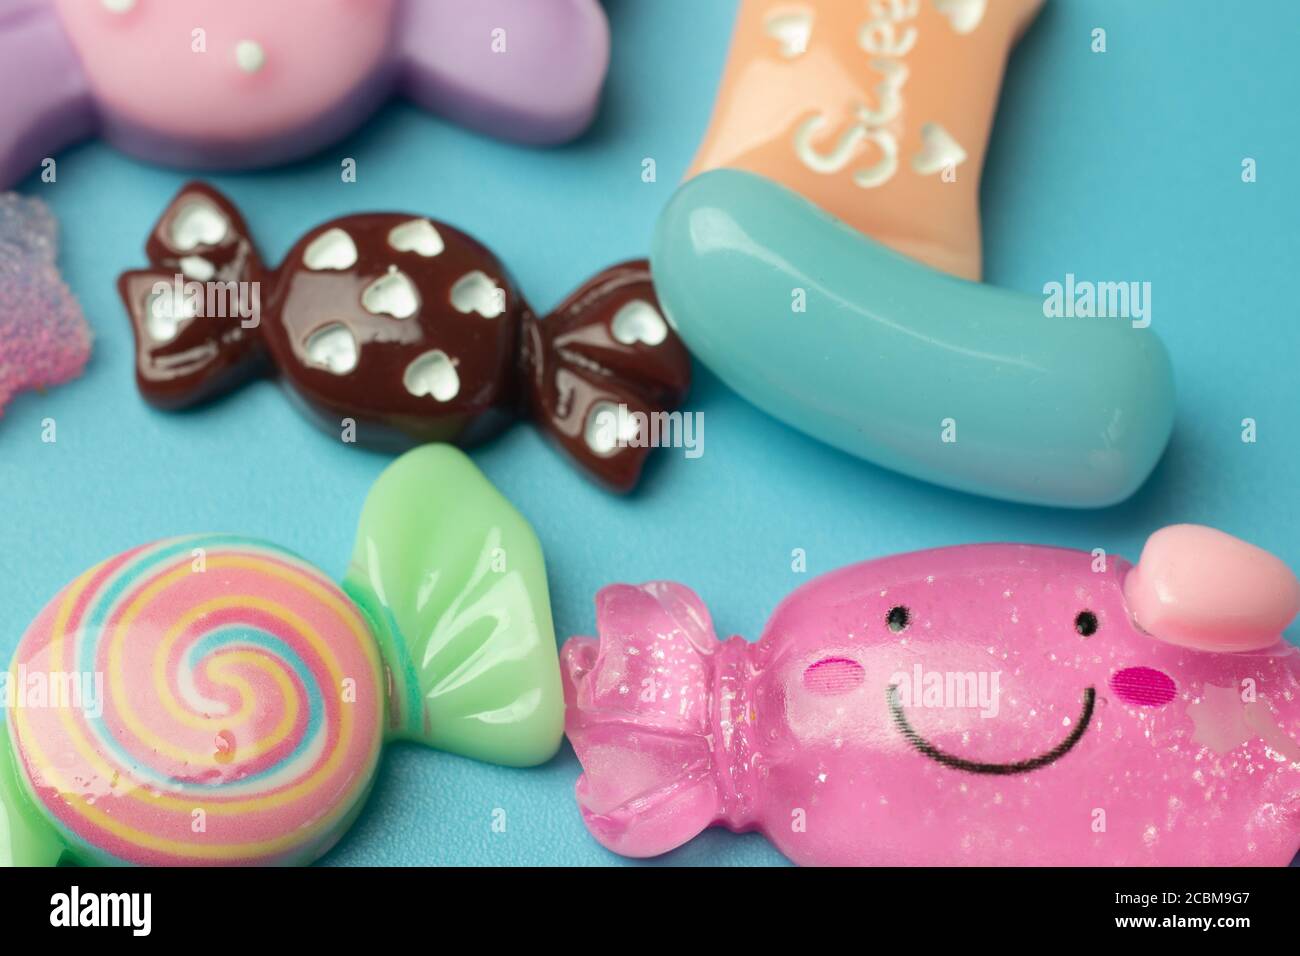 Cheerful background with candy toy close-up, holidays and weekend design Stock Photo